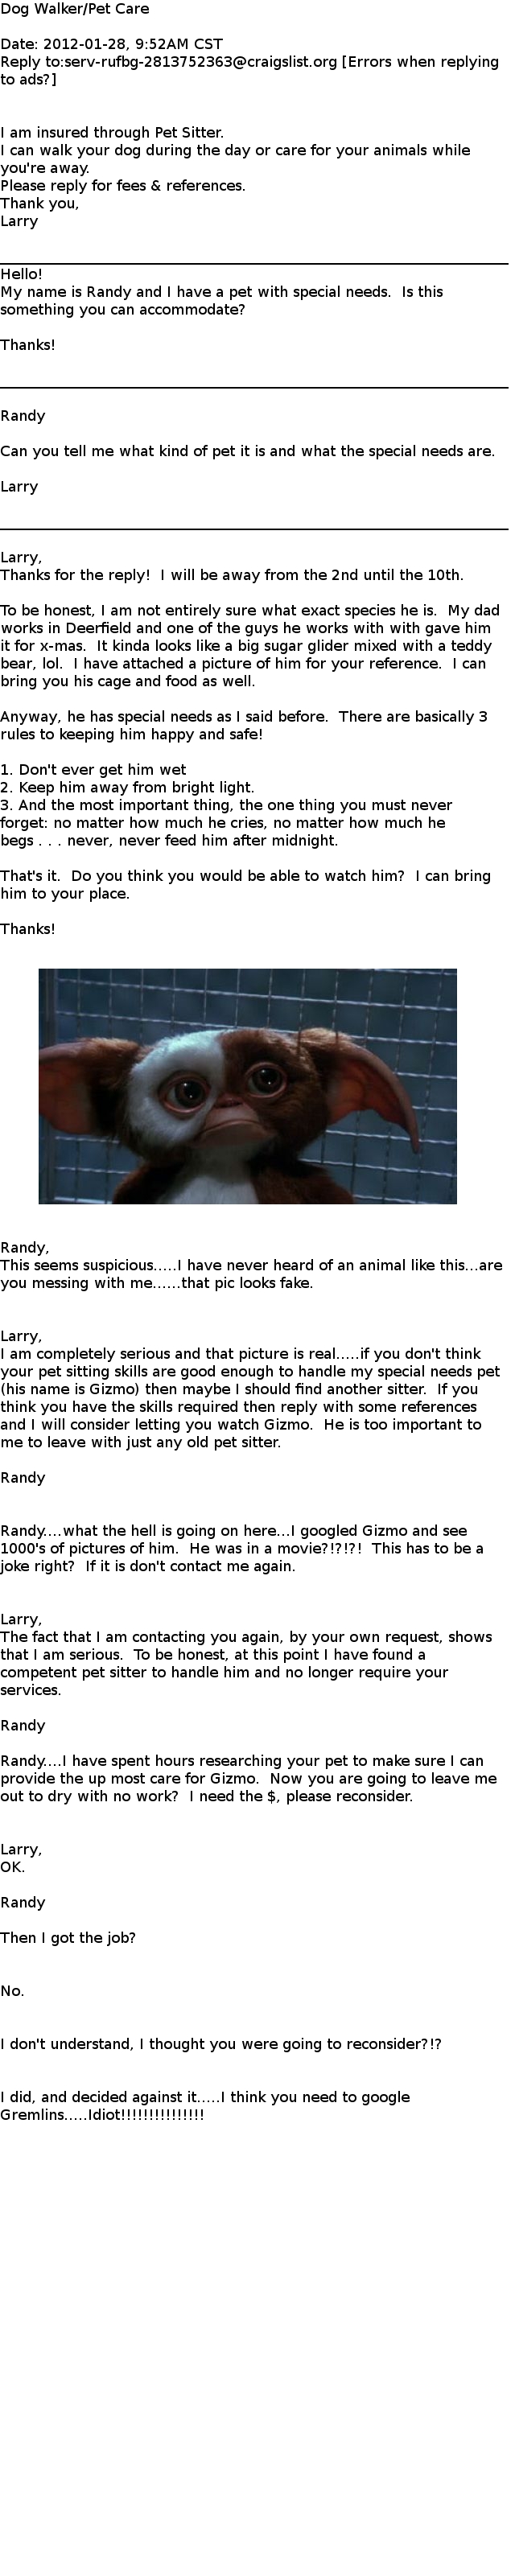 Stupid pet sitter never saw Gremlins????  I love messing with Craigslist posters.